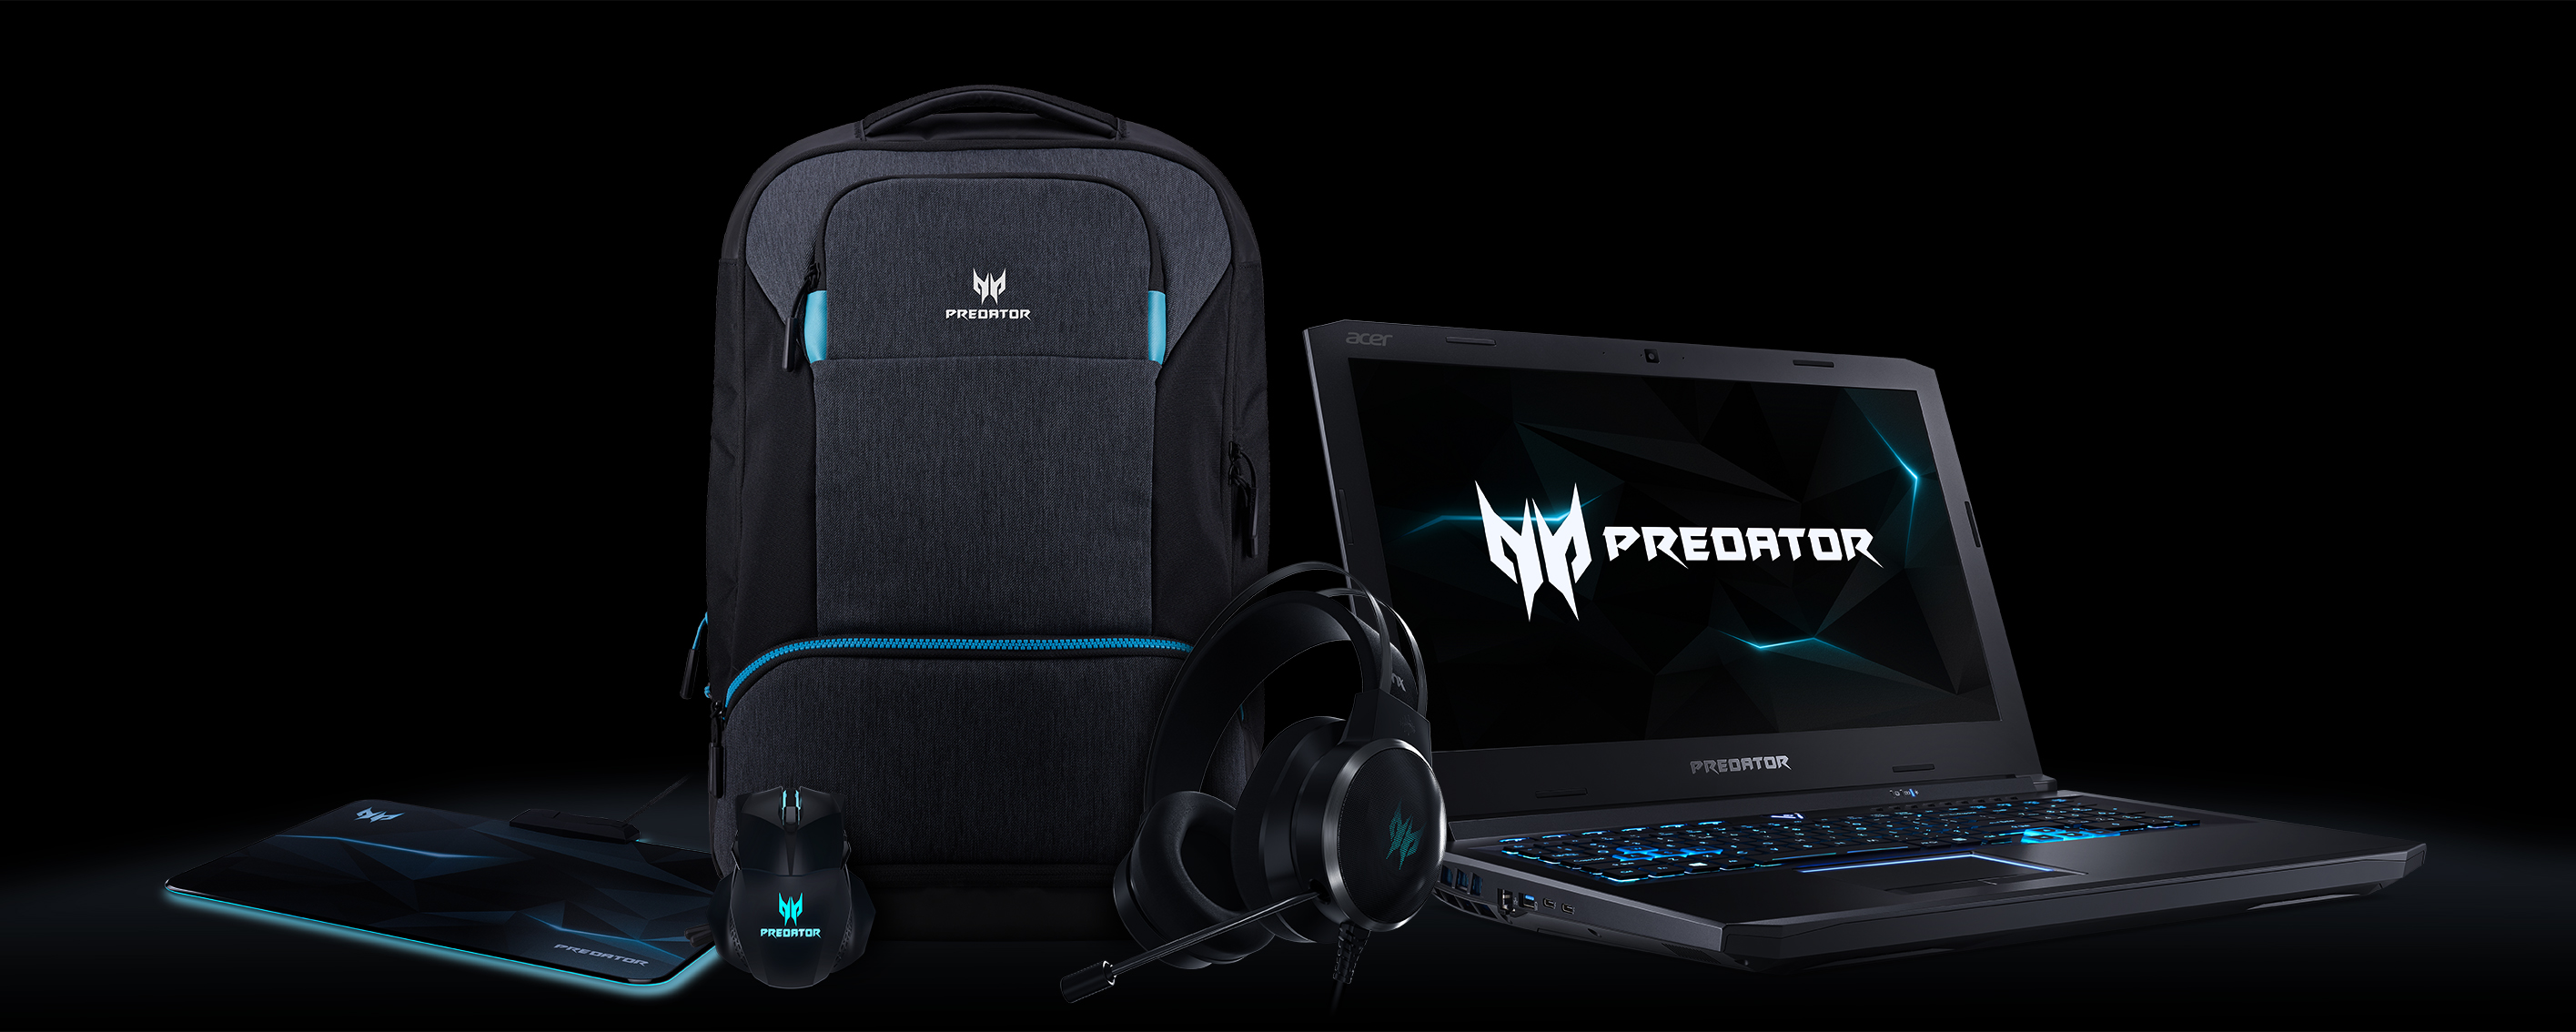 next@acer NYC Announces Latest Acer and Predator Gaming Products